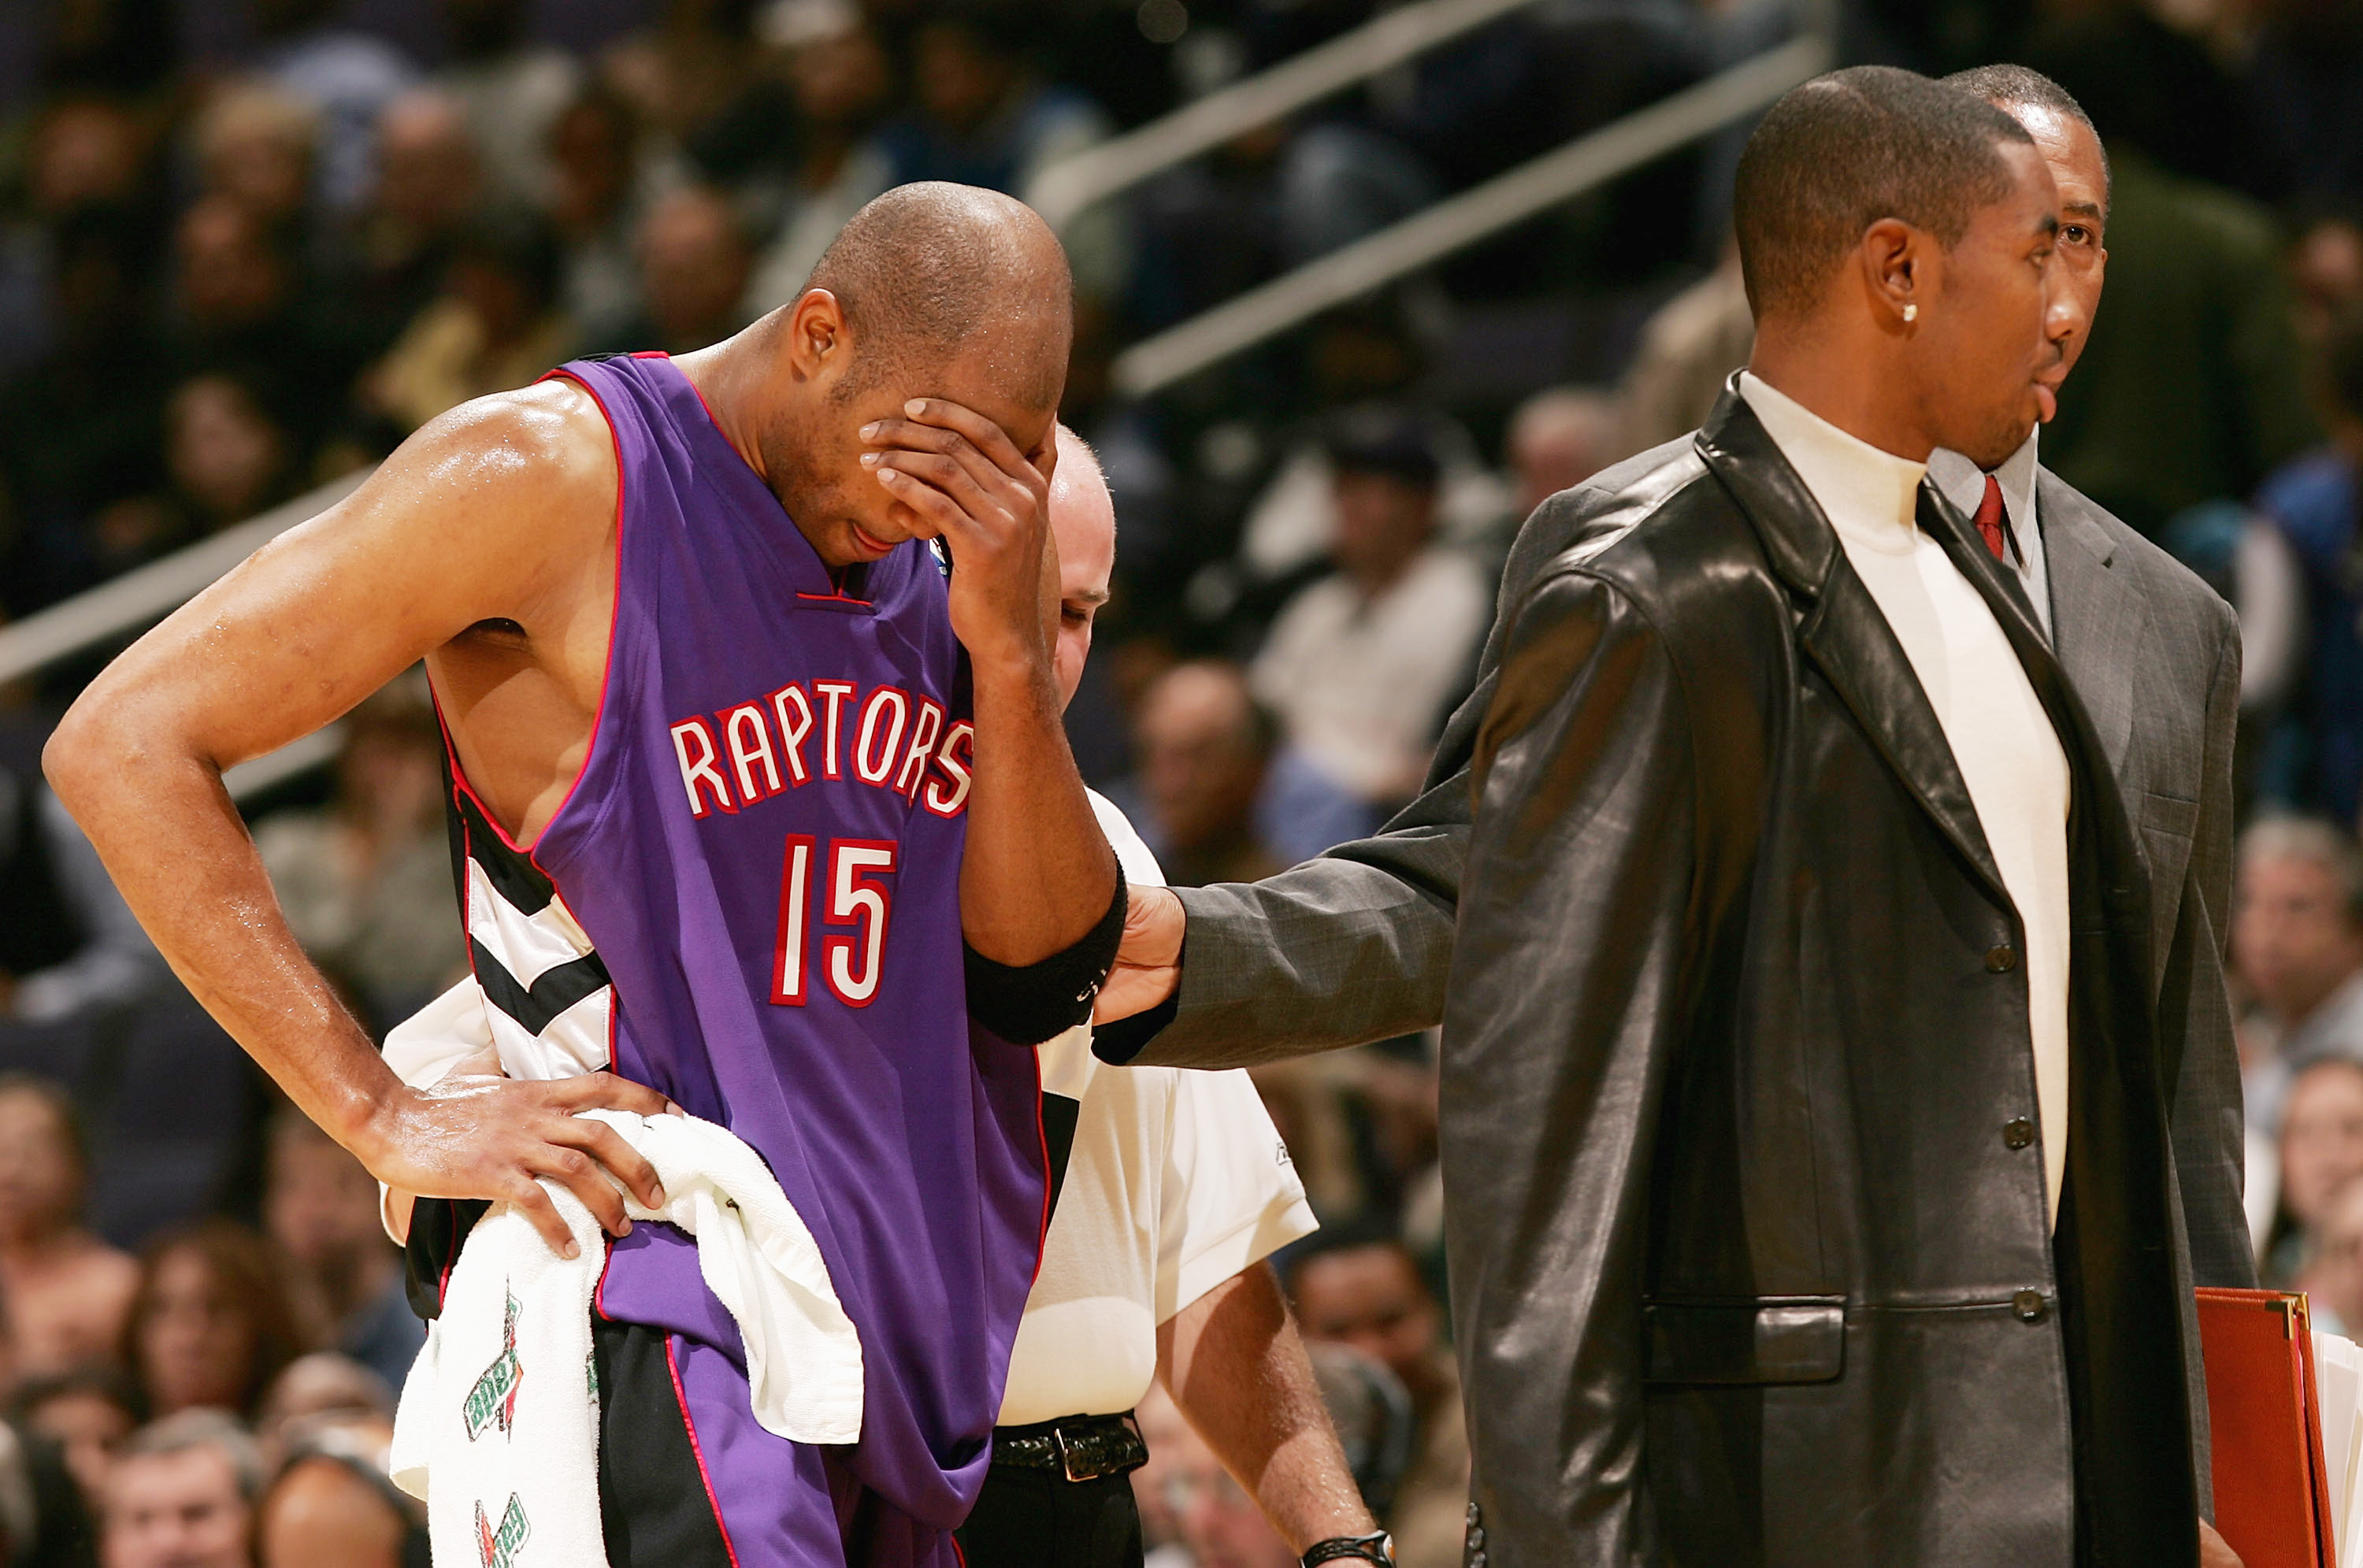 WAHINGTON DC - NOVEMBER 23:  Vince Carter #15 of the Toronoto Raptors leaves the court during the first half after he collided with Larry Hughes #20 of the Washington Wizards November 23, 2004 at the MCI Center in Washington D.C.  NOTE TO USER:  User expr